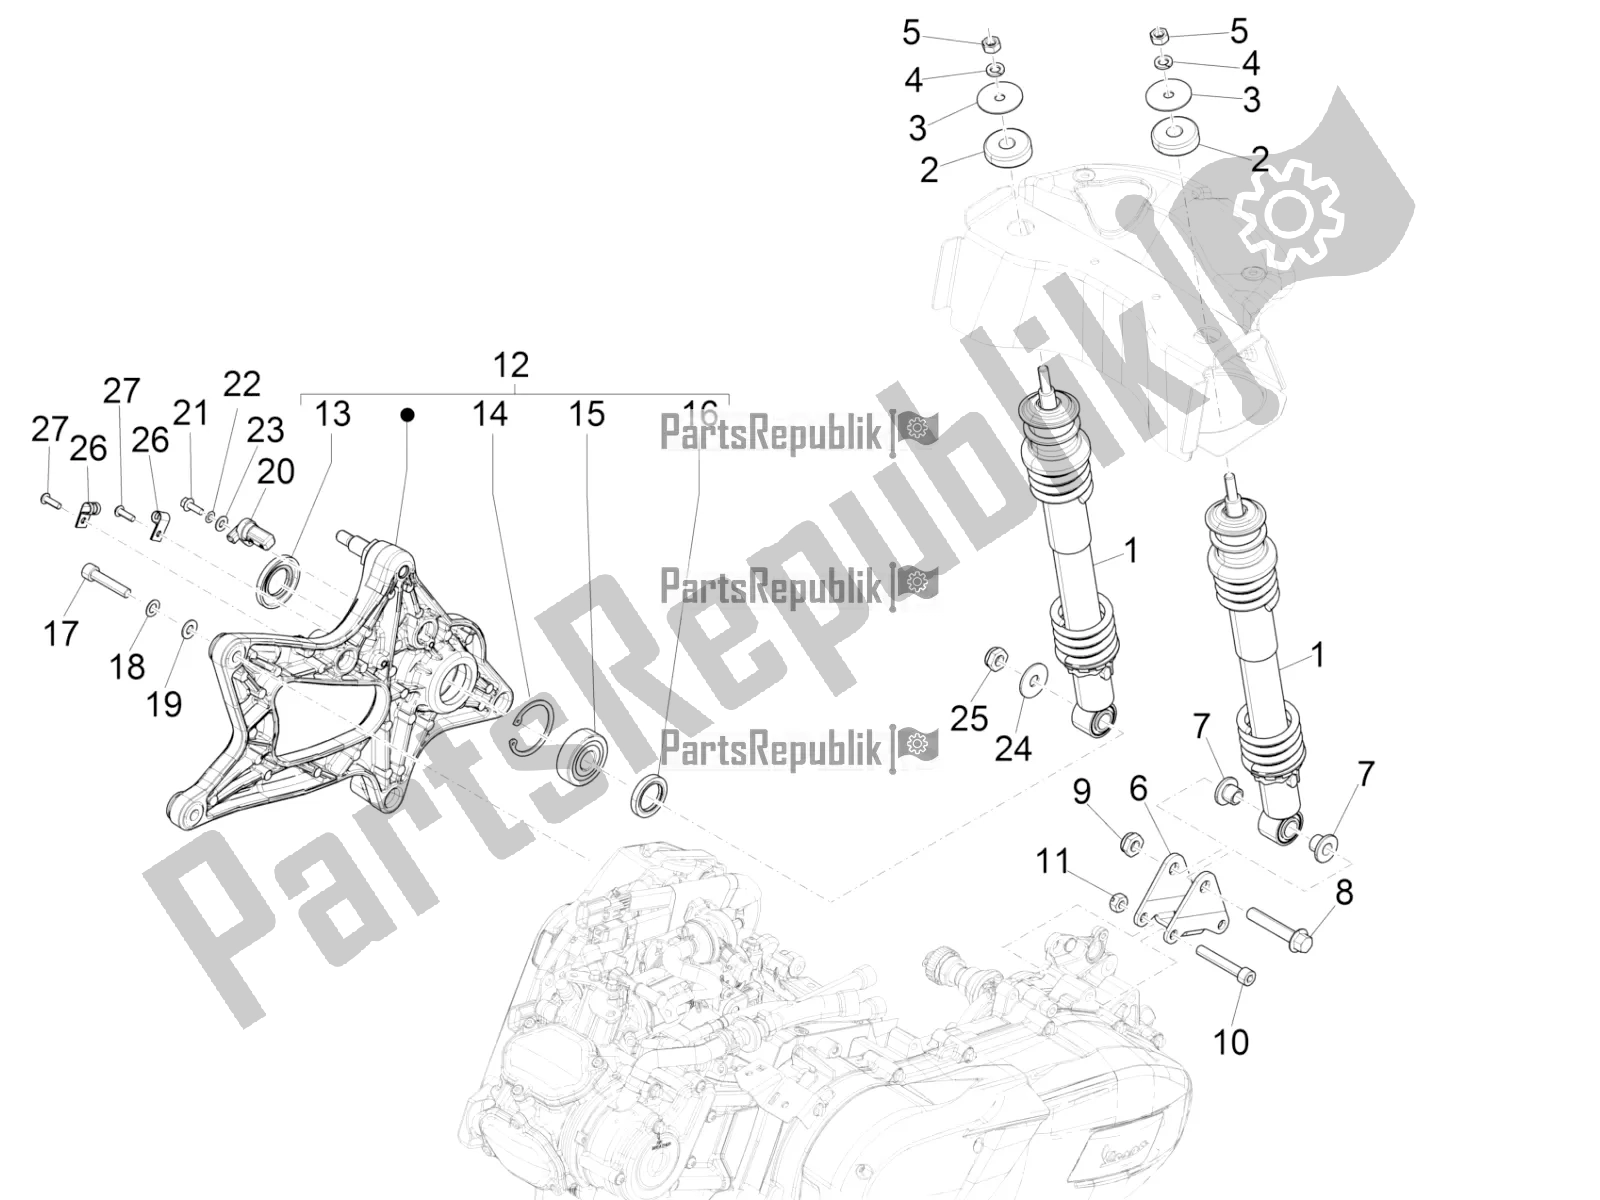 All parts for the Rear Suspension - Shock Absorber/s of the Vespa GTS 150 Super-Super Sport ABS Apac 2022